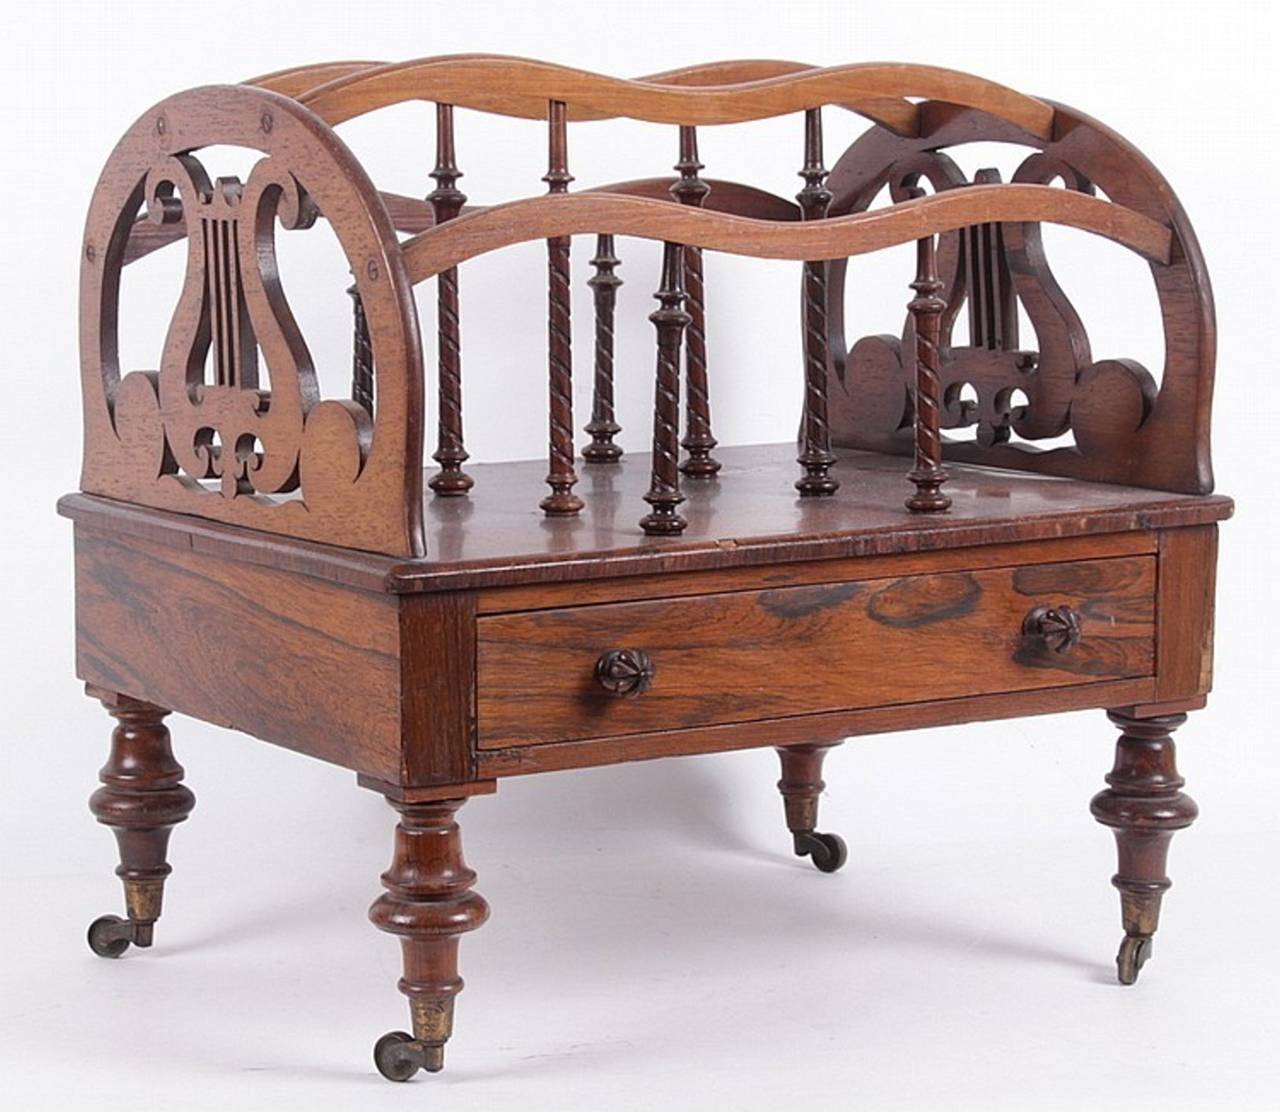 Fine Regency rosewood canterbury, with arched lyre ends with
undulating strap dividers with rope turned supports, above one working drawer, set on turned legs ending in original brass cup casters. A very successful form and retaining rich mellow